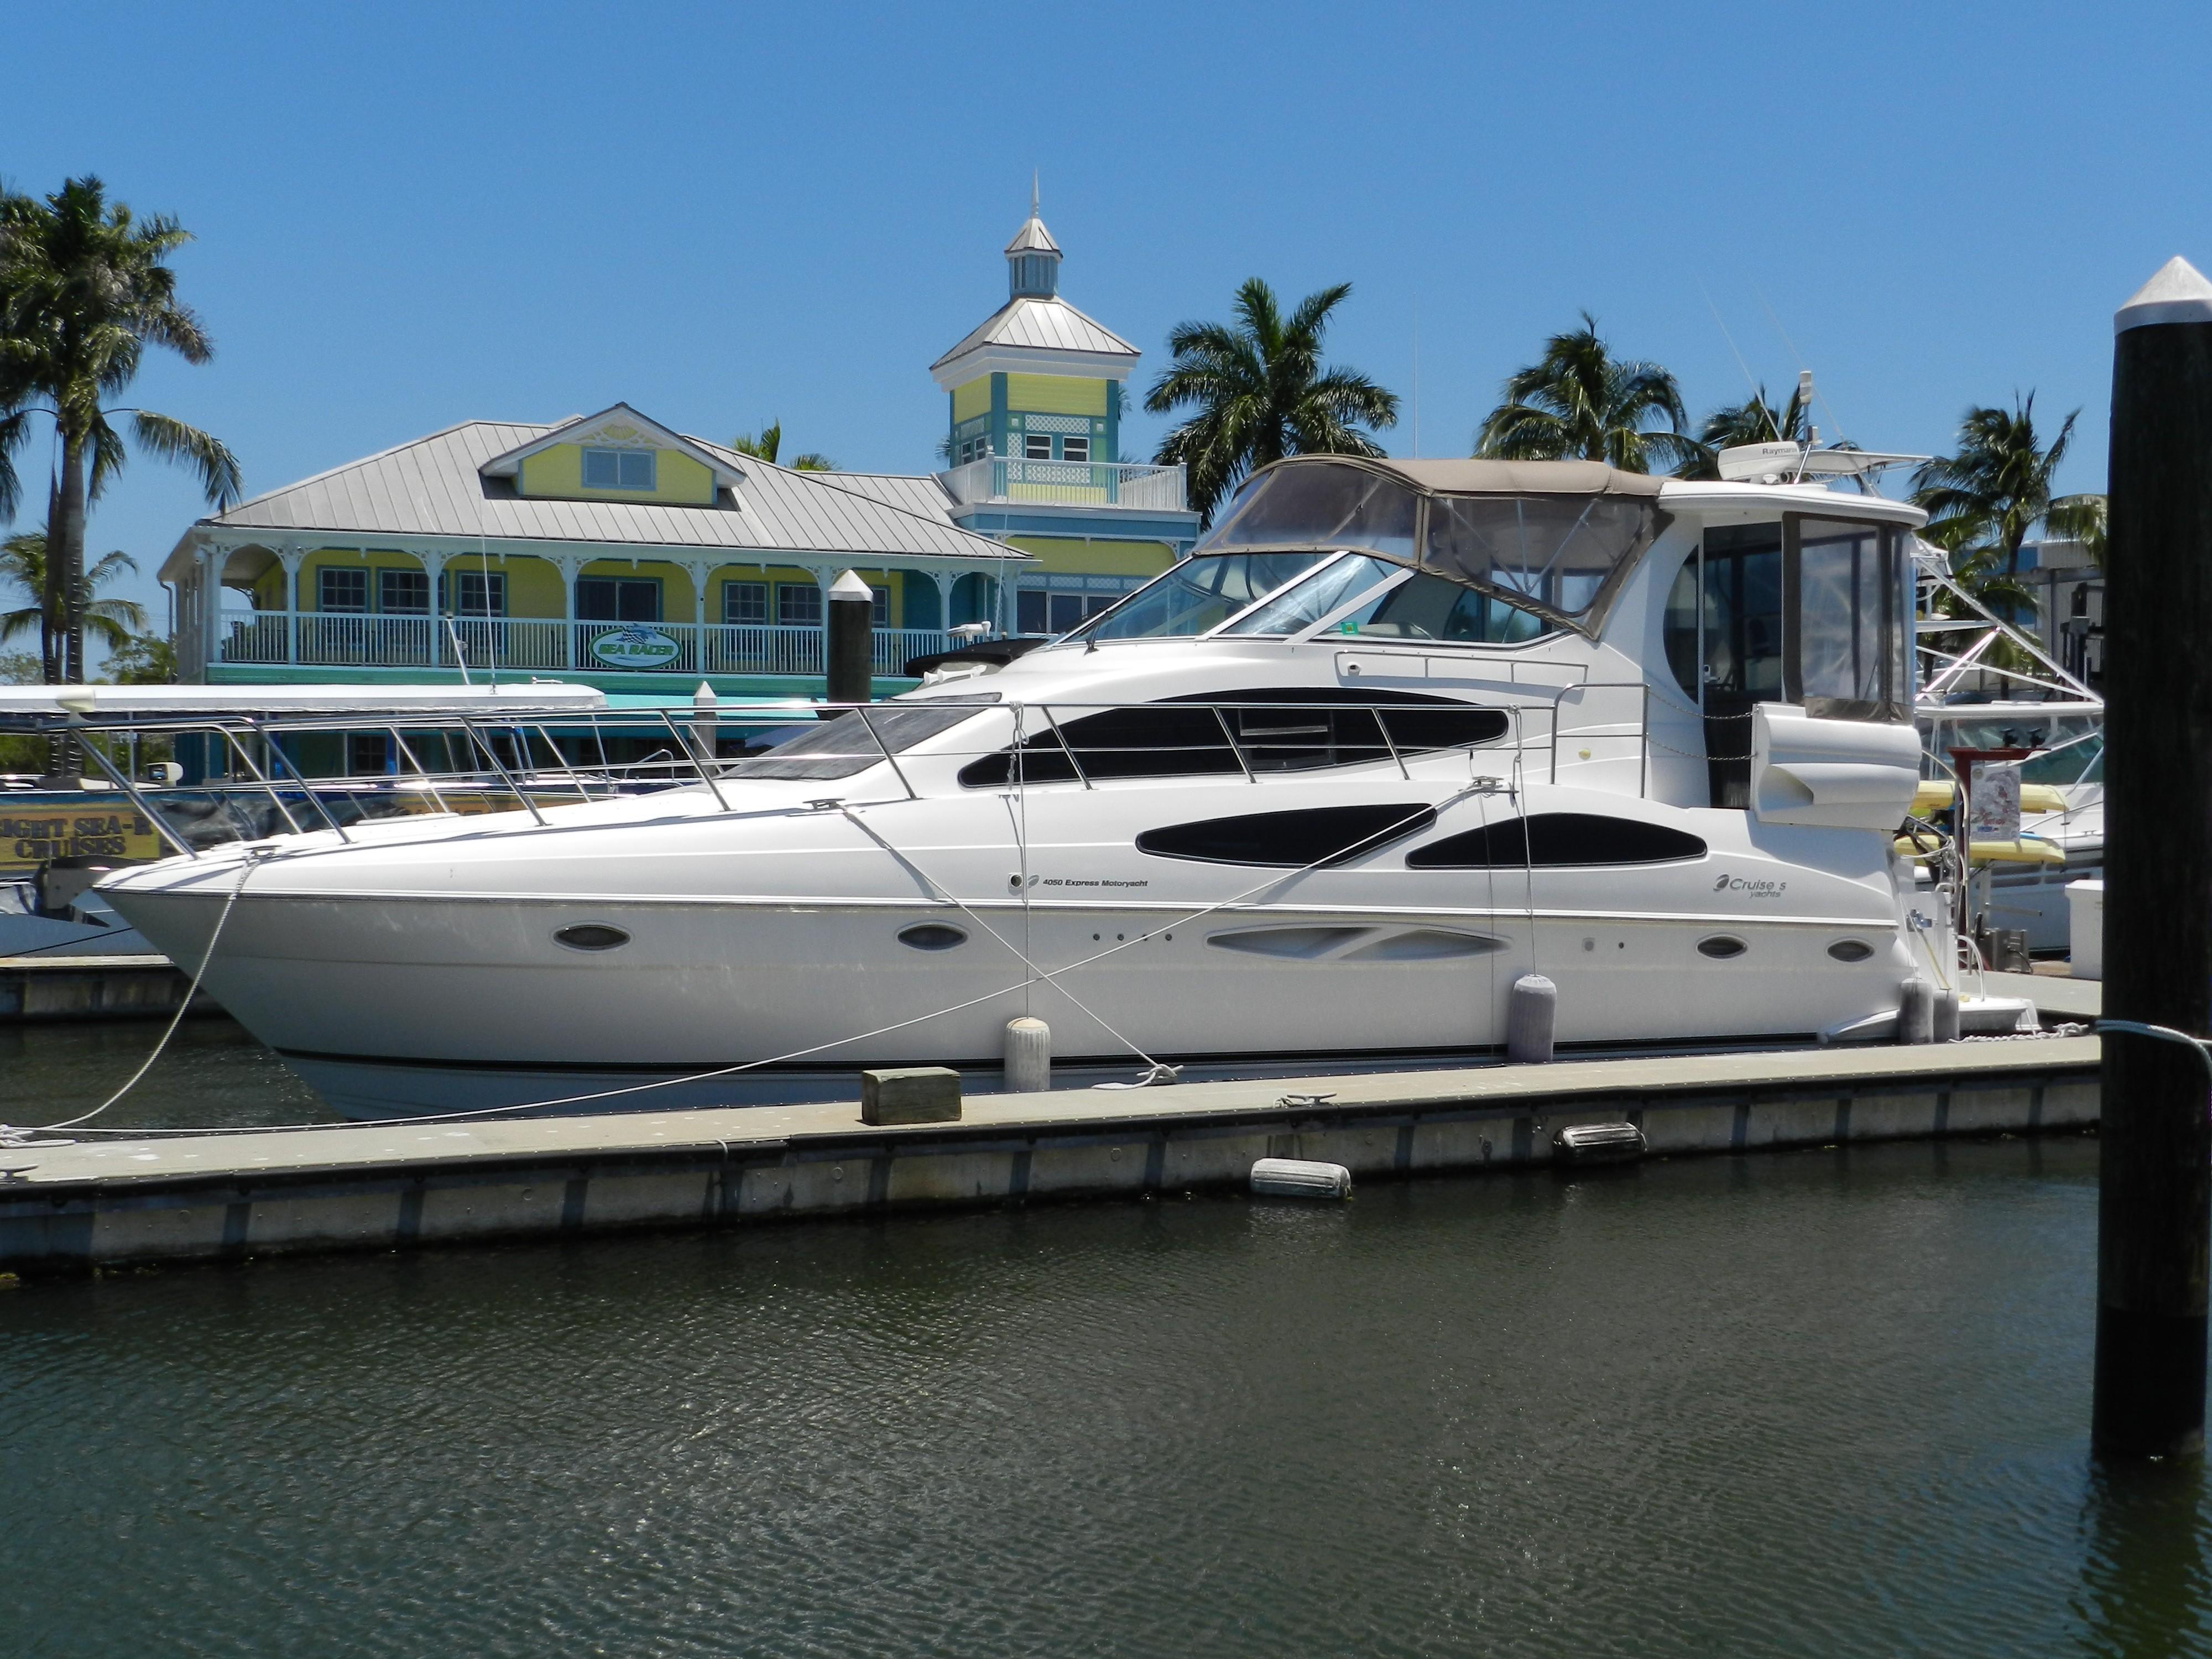 40 foot yachts for sale in florida